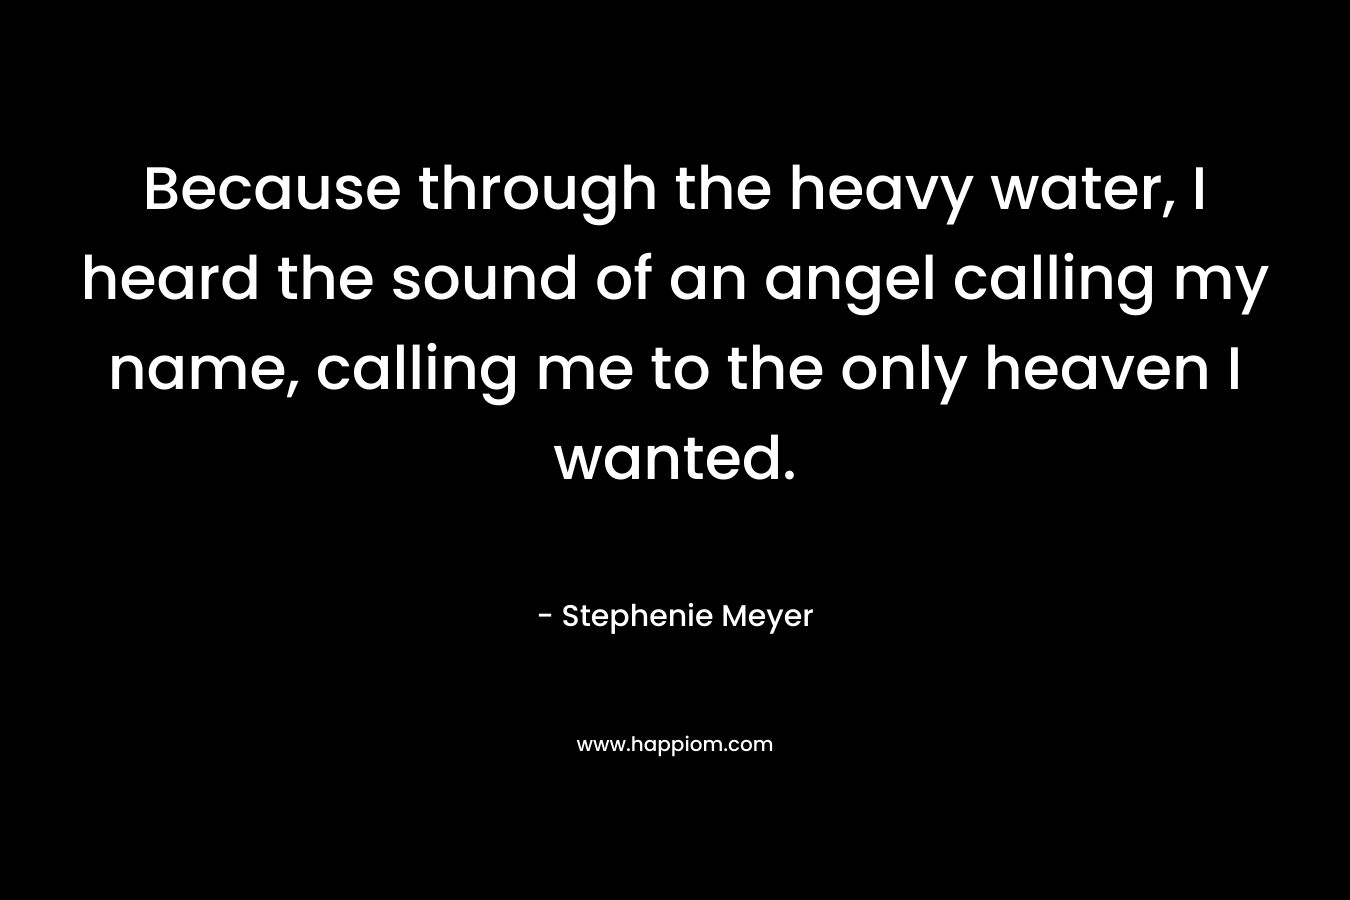 Because through the heavy water, I heard the sound of an angel calling my name, calling me to the only heaven I wanted. – Stephenie Meyer